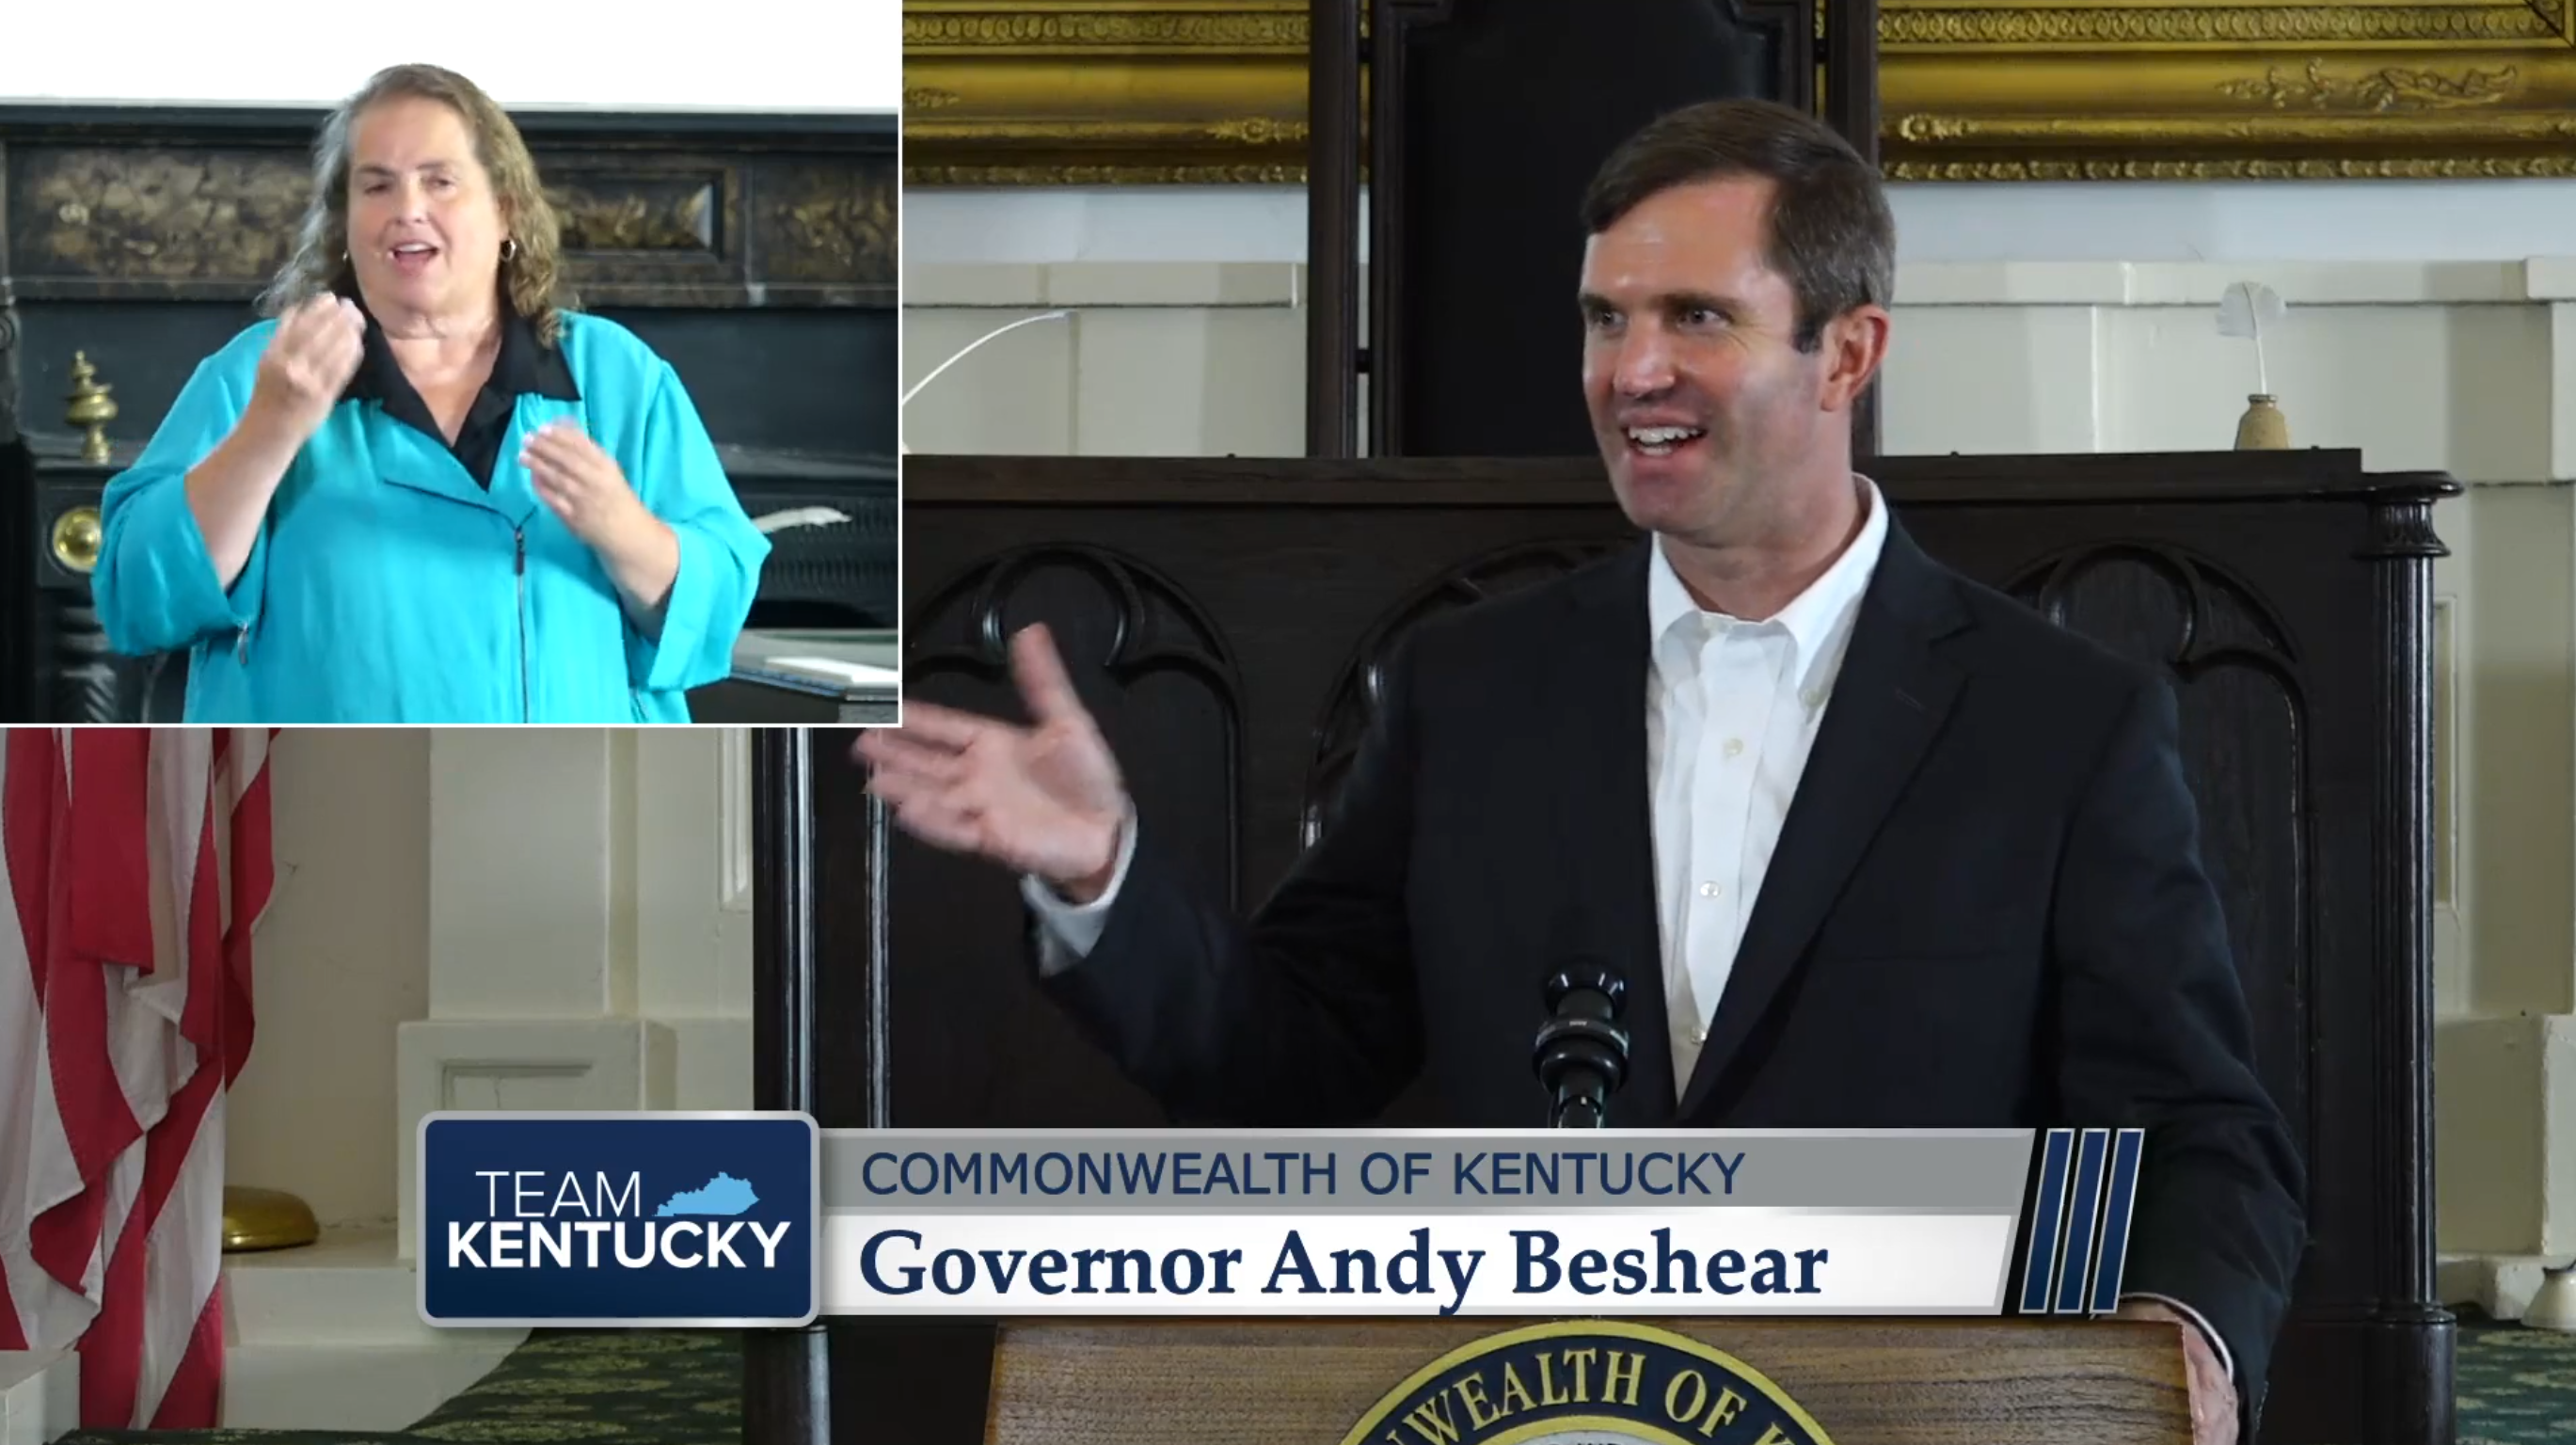 Beshear ceases daily COVID-19 live briefings